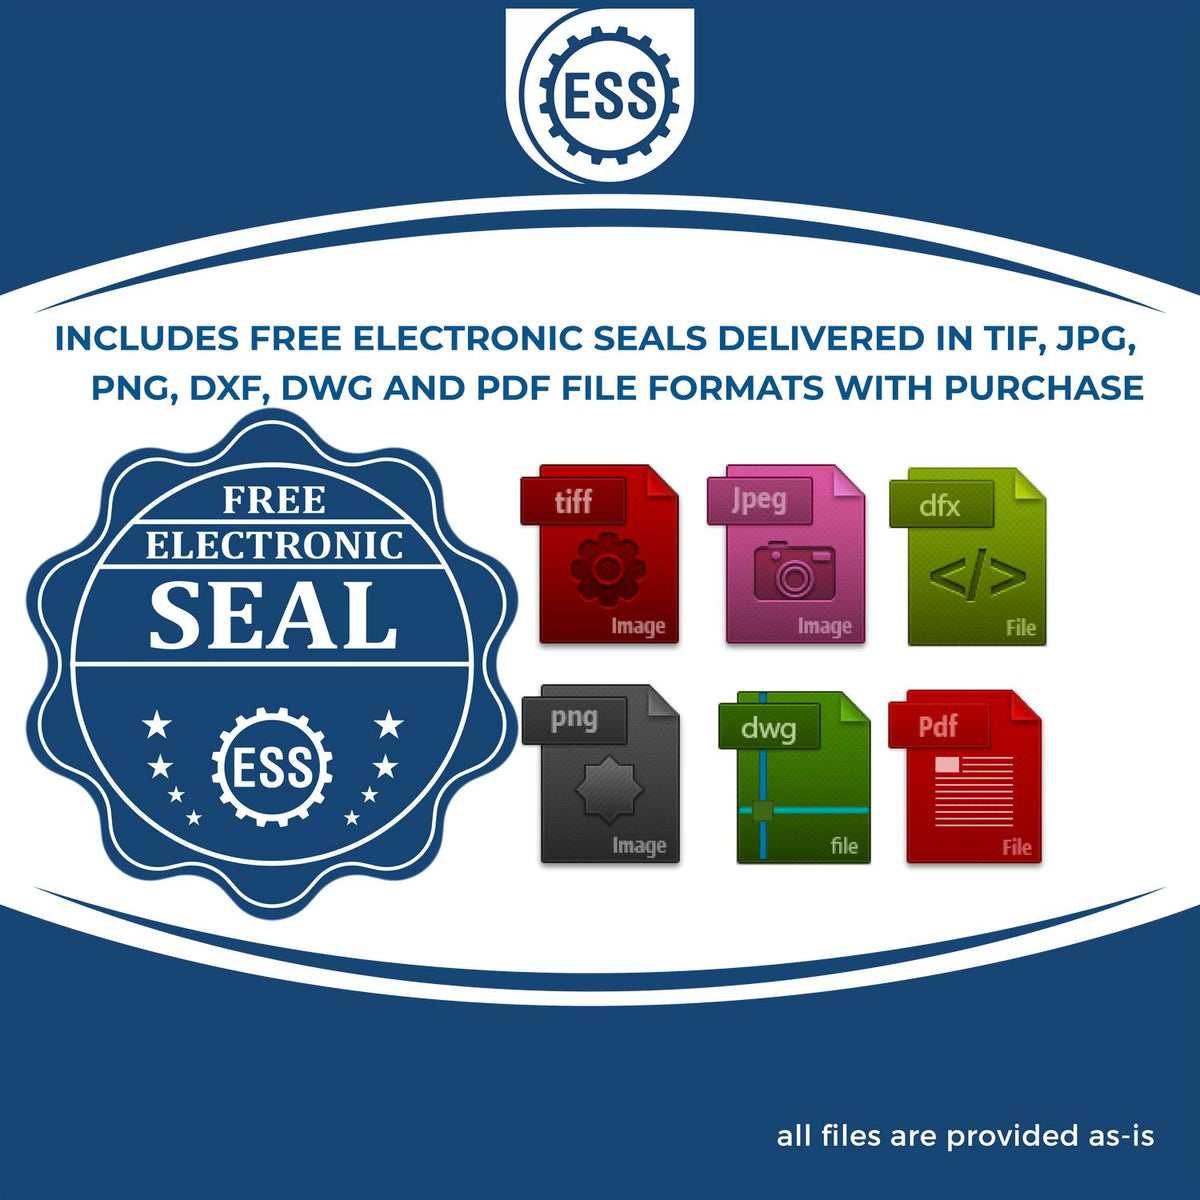 An infographic for the free electronic seal for the Long Reach Missouri Land Surveyor Seal illustrating the different file type icons such as DXF, DWG, TIF, JPG and PNG.